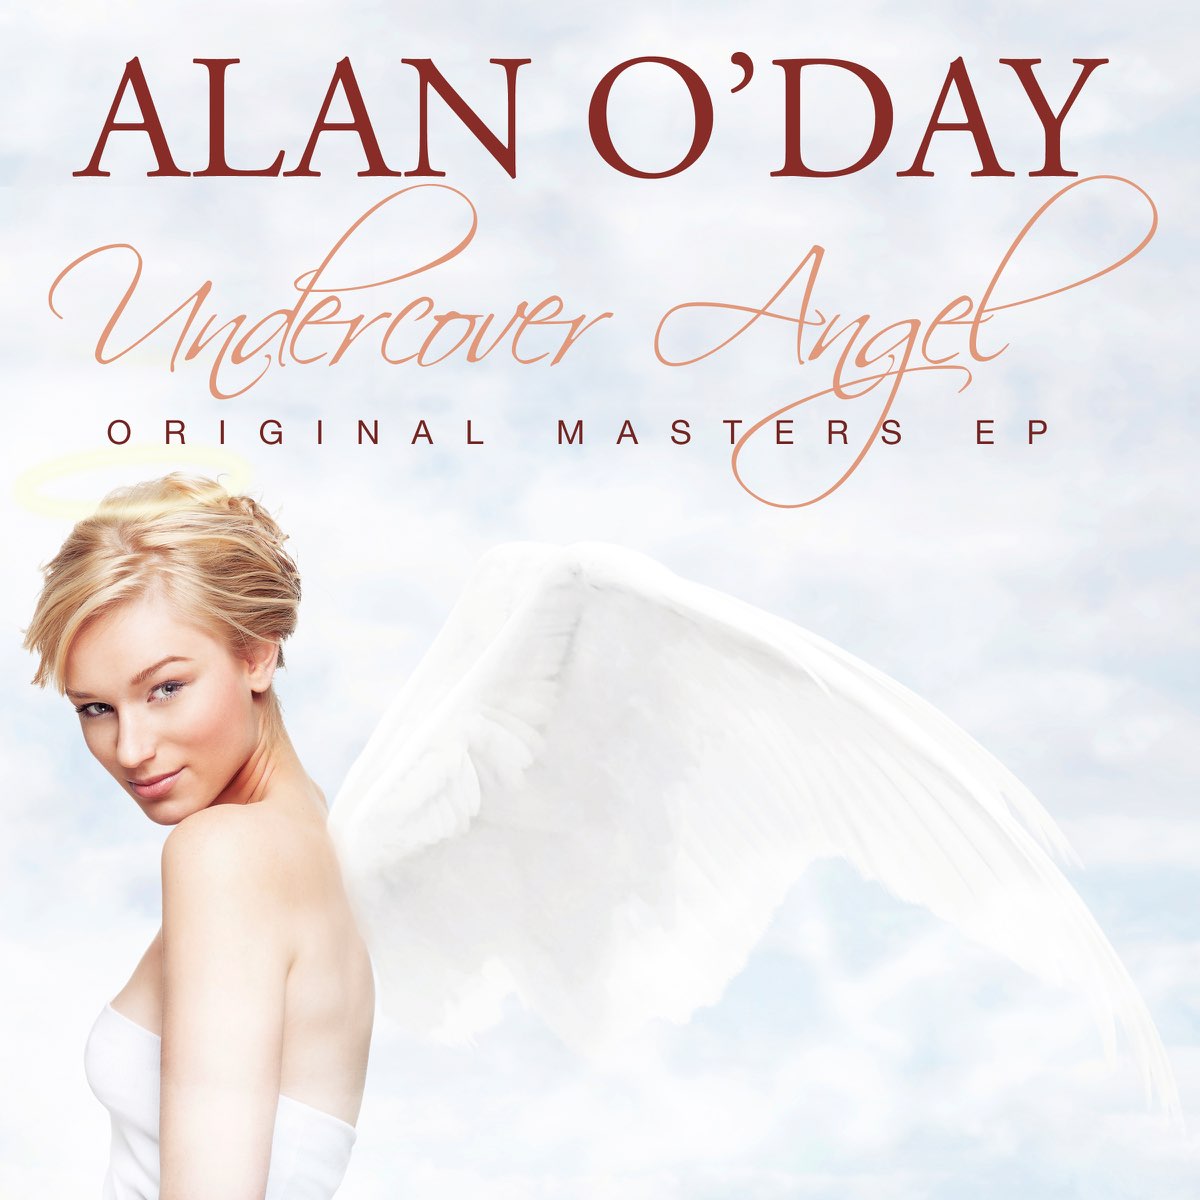 Undercover Angel Original Masters - EP - Album by Alan O'Day - Apple Music